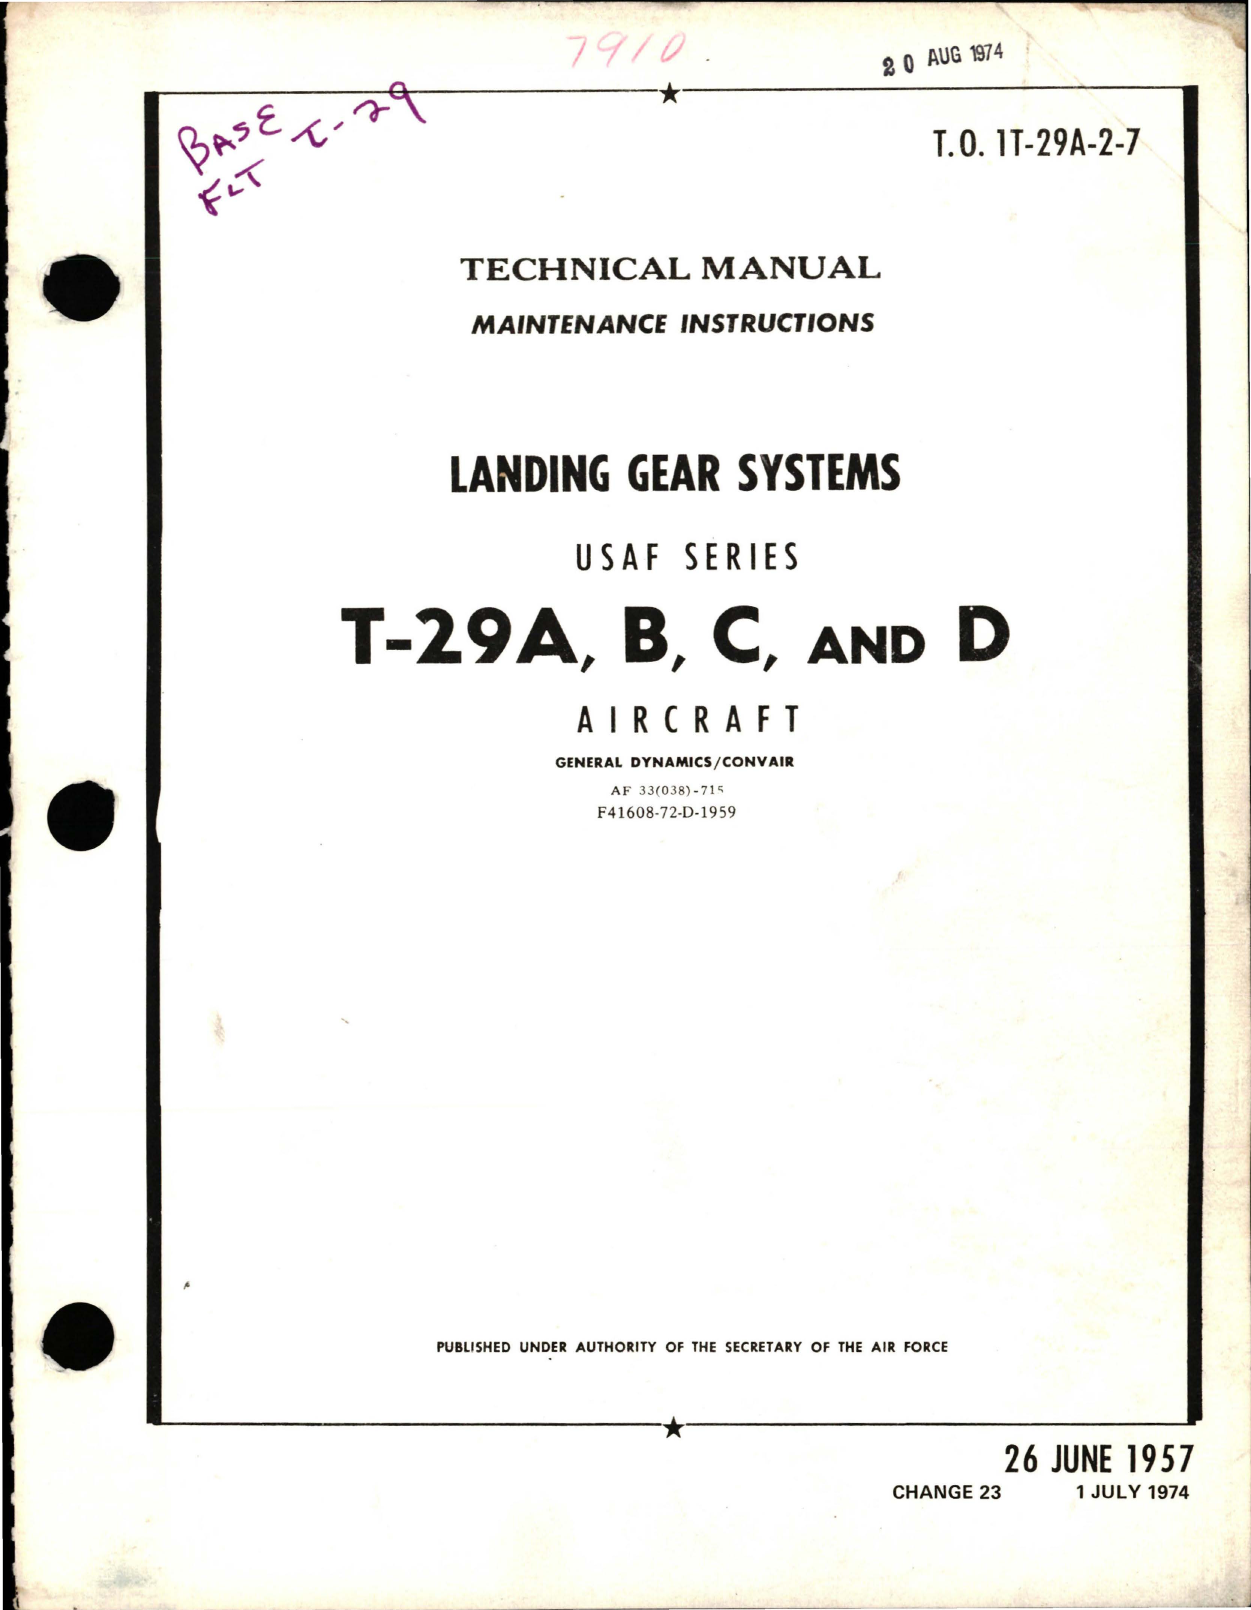 Sample page 1 from AirCorps Library document: Maintenance Instructions for Landing Gear Systems - T-29A, T-29B, T-29C and T-29D